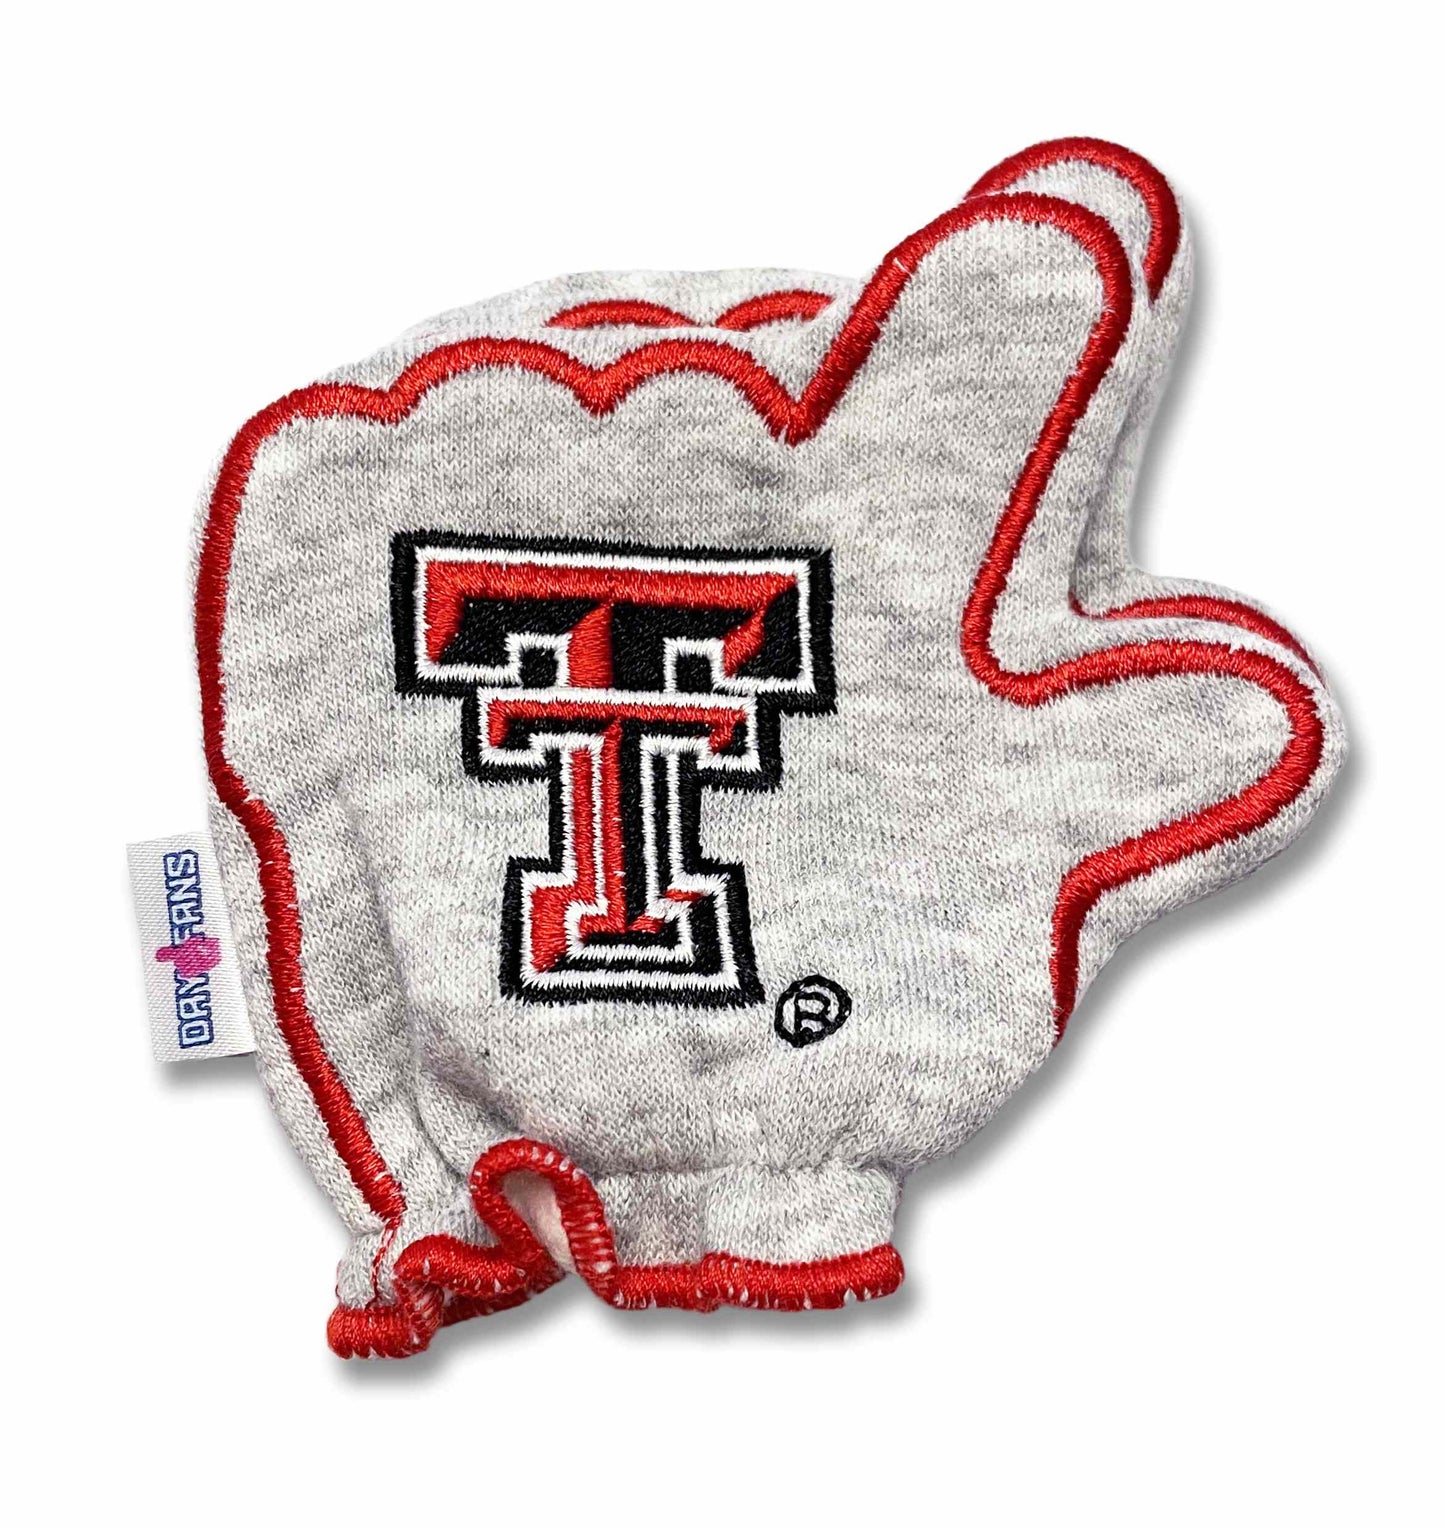 Texas Tech Wreck Em FanMitts Baby Mittens Heathered Gray Back Pair Stacked